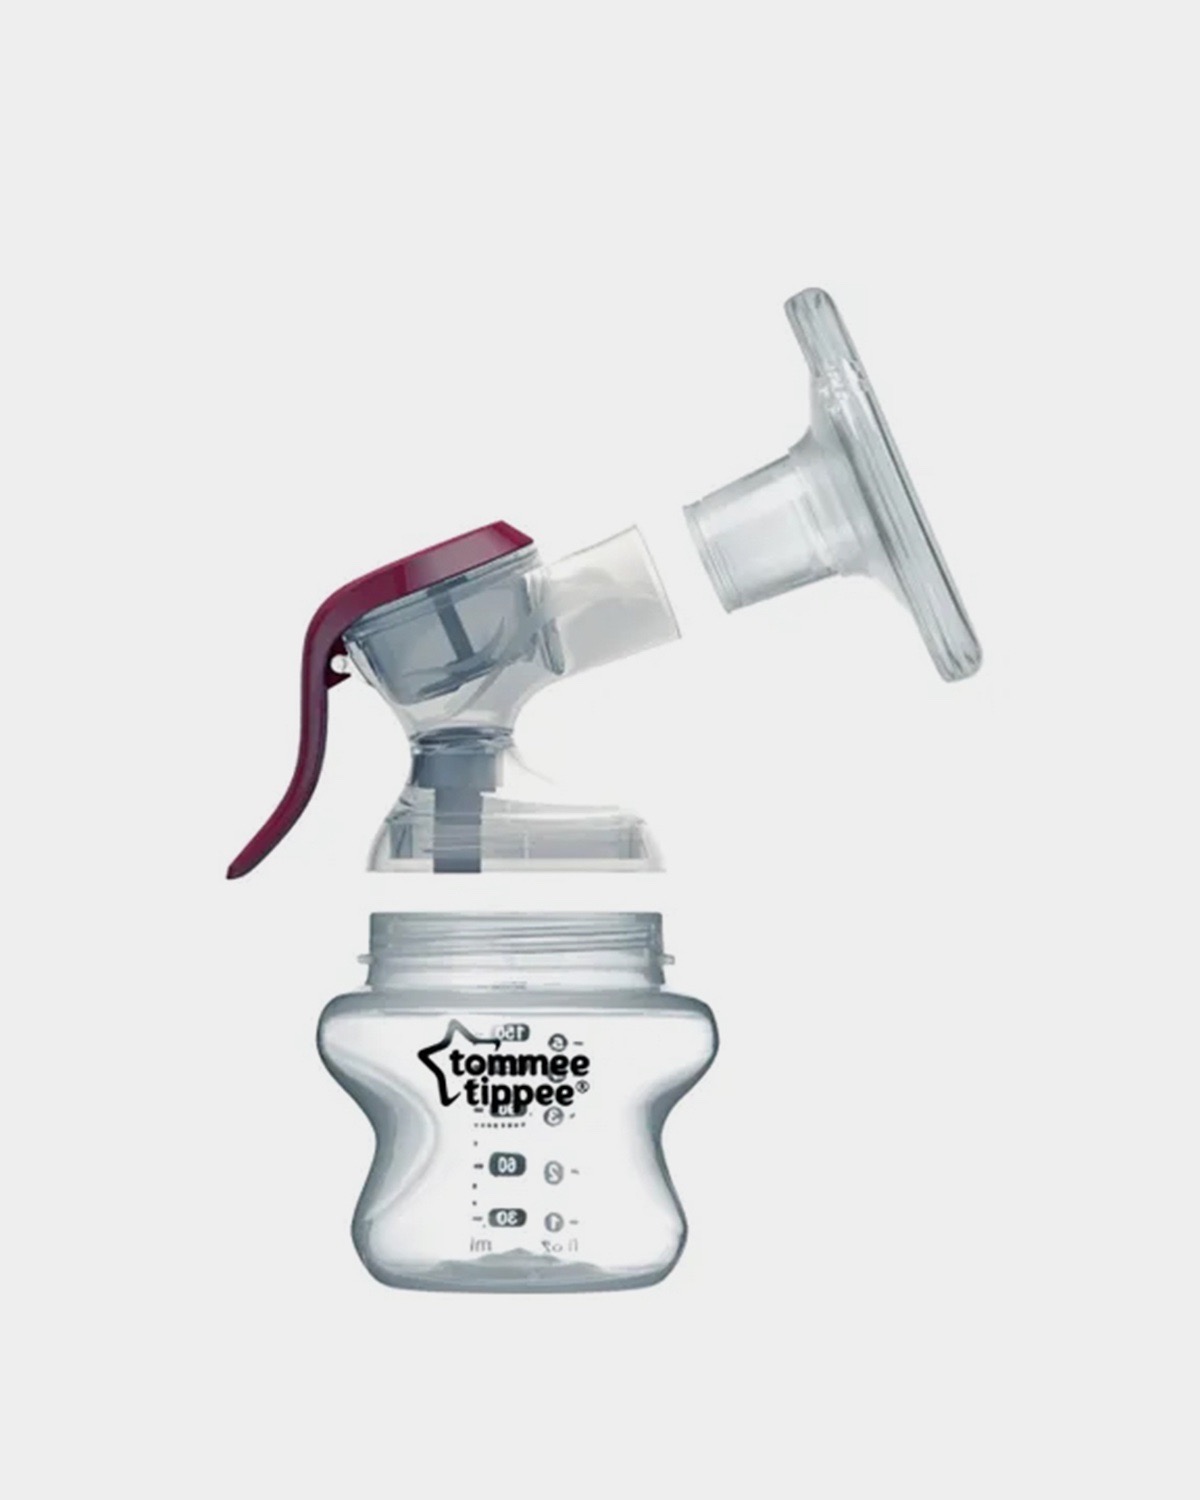 How to clean the Tommee Tippee Electric Breast Pump on Vimeo